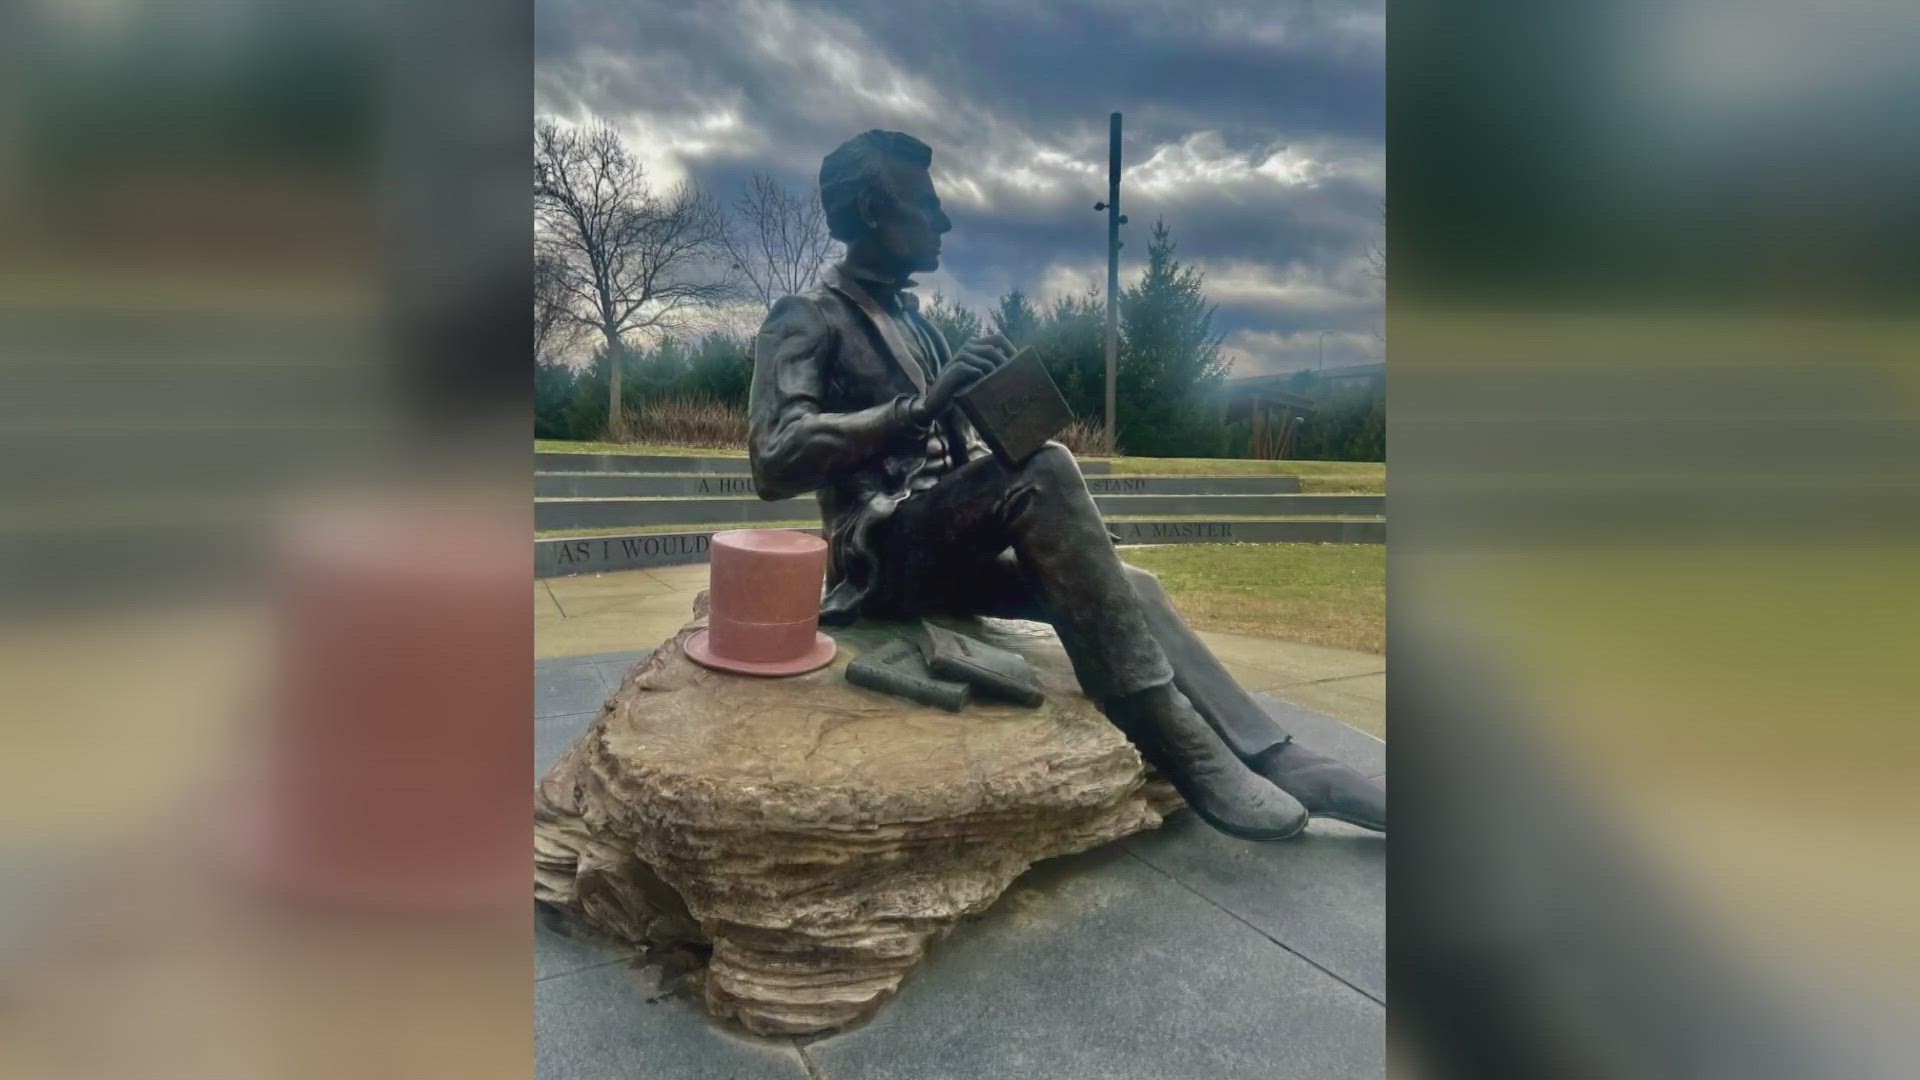 In December, someone stole the top hat from the Abraham Lincoln statue at Waterfront Park in Louisville.